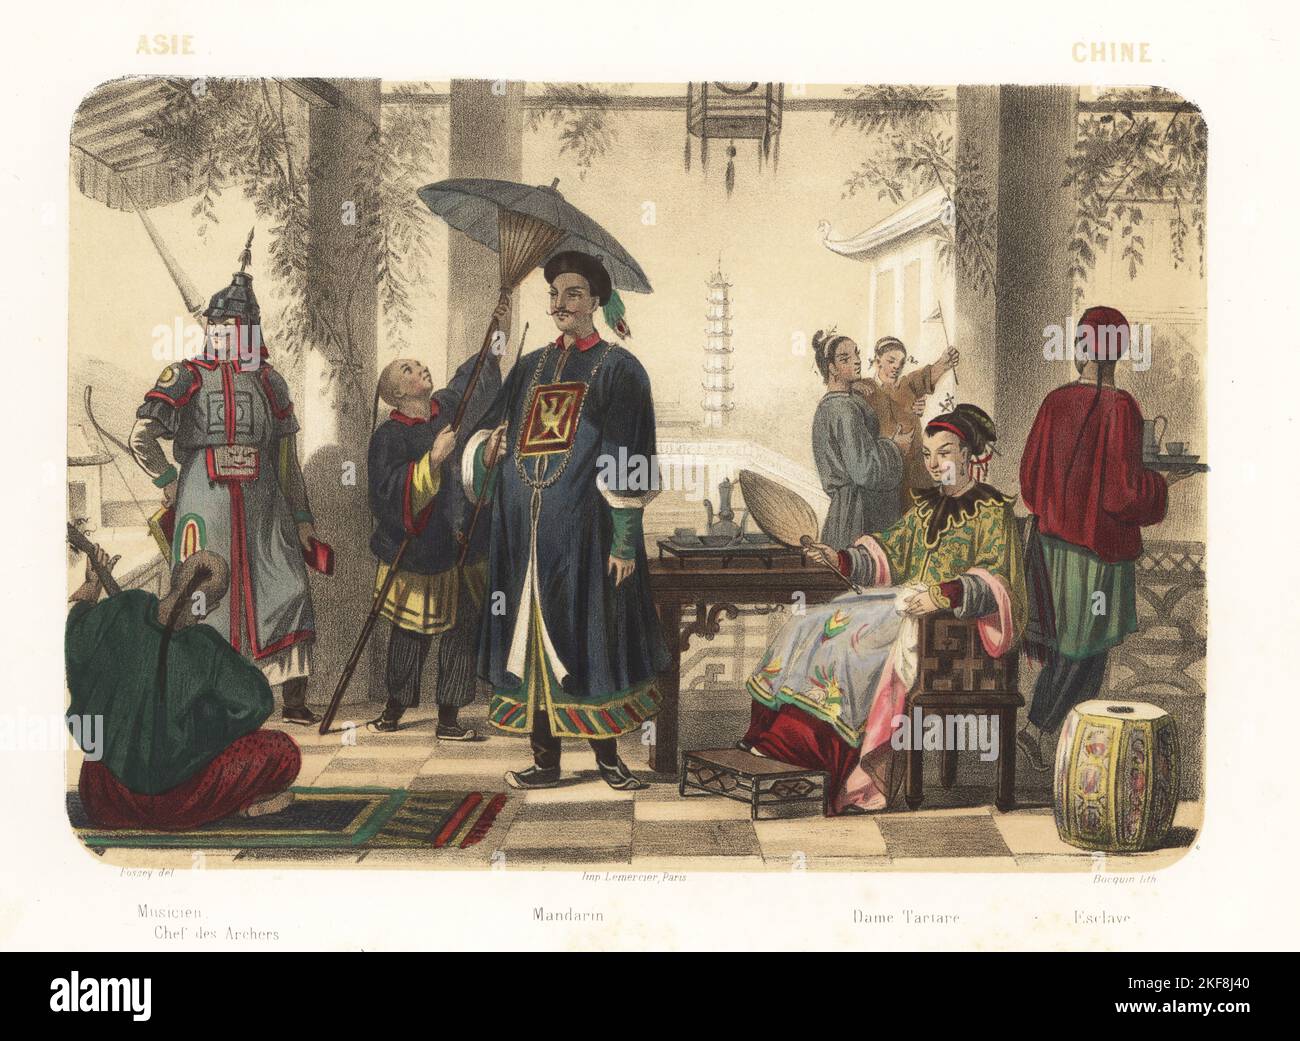 Costumes of China, 1858. Musician playing a pipa or Chinese lute, Chief Archer in helmet and robes, Mandarin bureaucrat with rank badge and a servant holding a parasol, Tatar Lady seated on a chair holding a fan, slave with long pigtail holding a tray of tea. Pagoda and palace in the background. Musicien, chef des archers, Mandarin, Dame Tartare, esclave. Handcoloured and sepia-tinted lithograph by Jean-Adolphe Bocquin after an illustration by Felix Fossey from Elisabeth Muller (pseudonym of Leonie Bedelet)’s Le Monde en Estampes, The World in Prints, Amadee Bedelet, Paris, 1858. Stock Photo